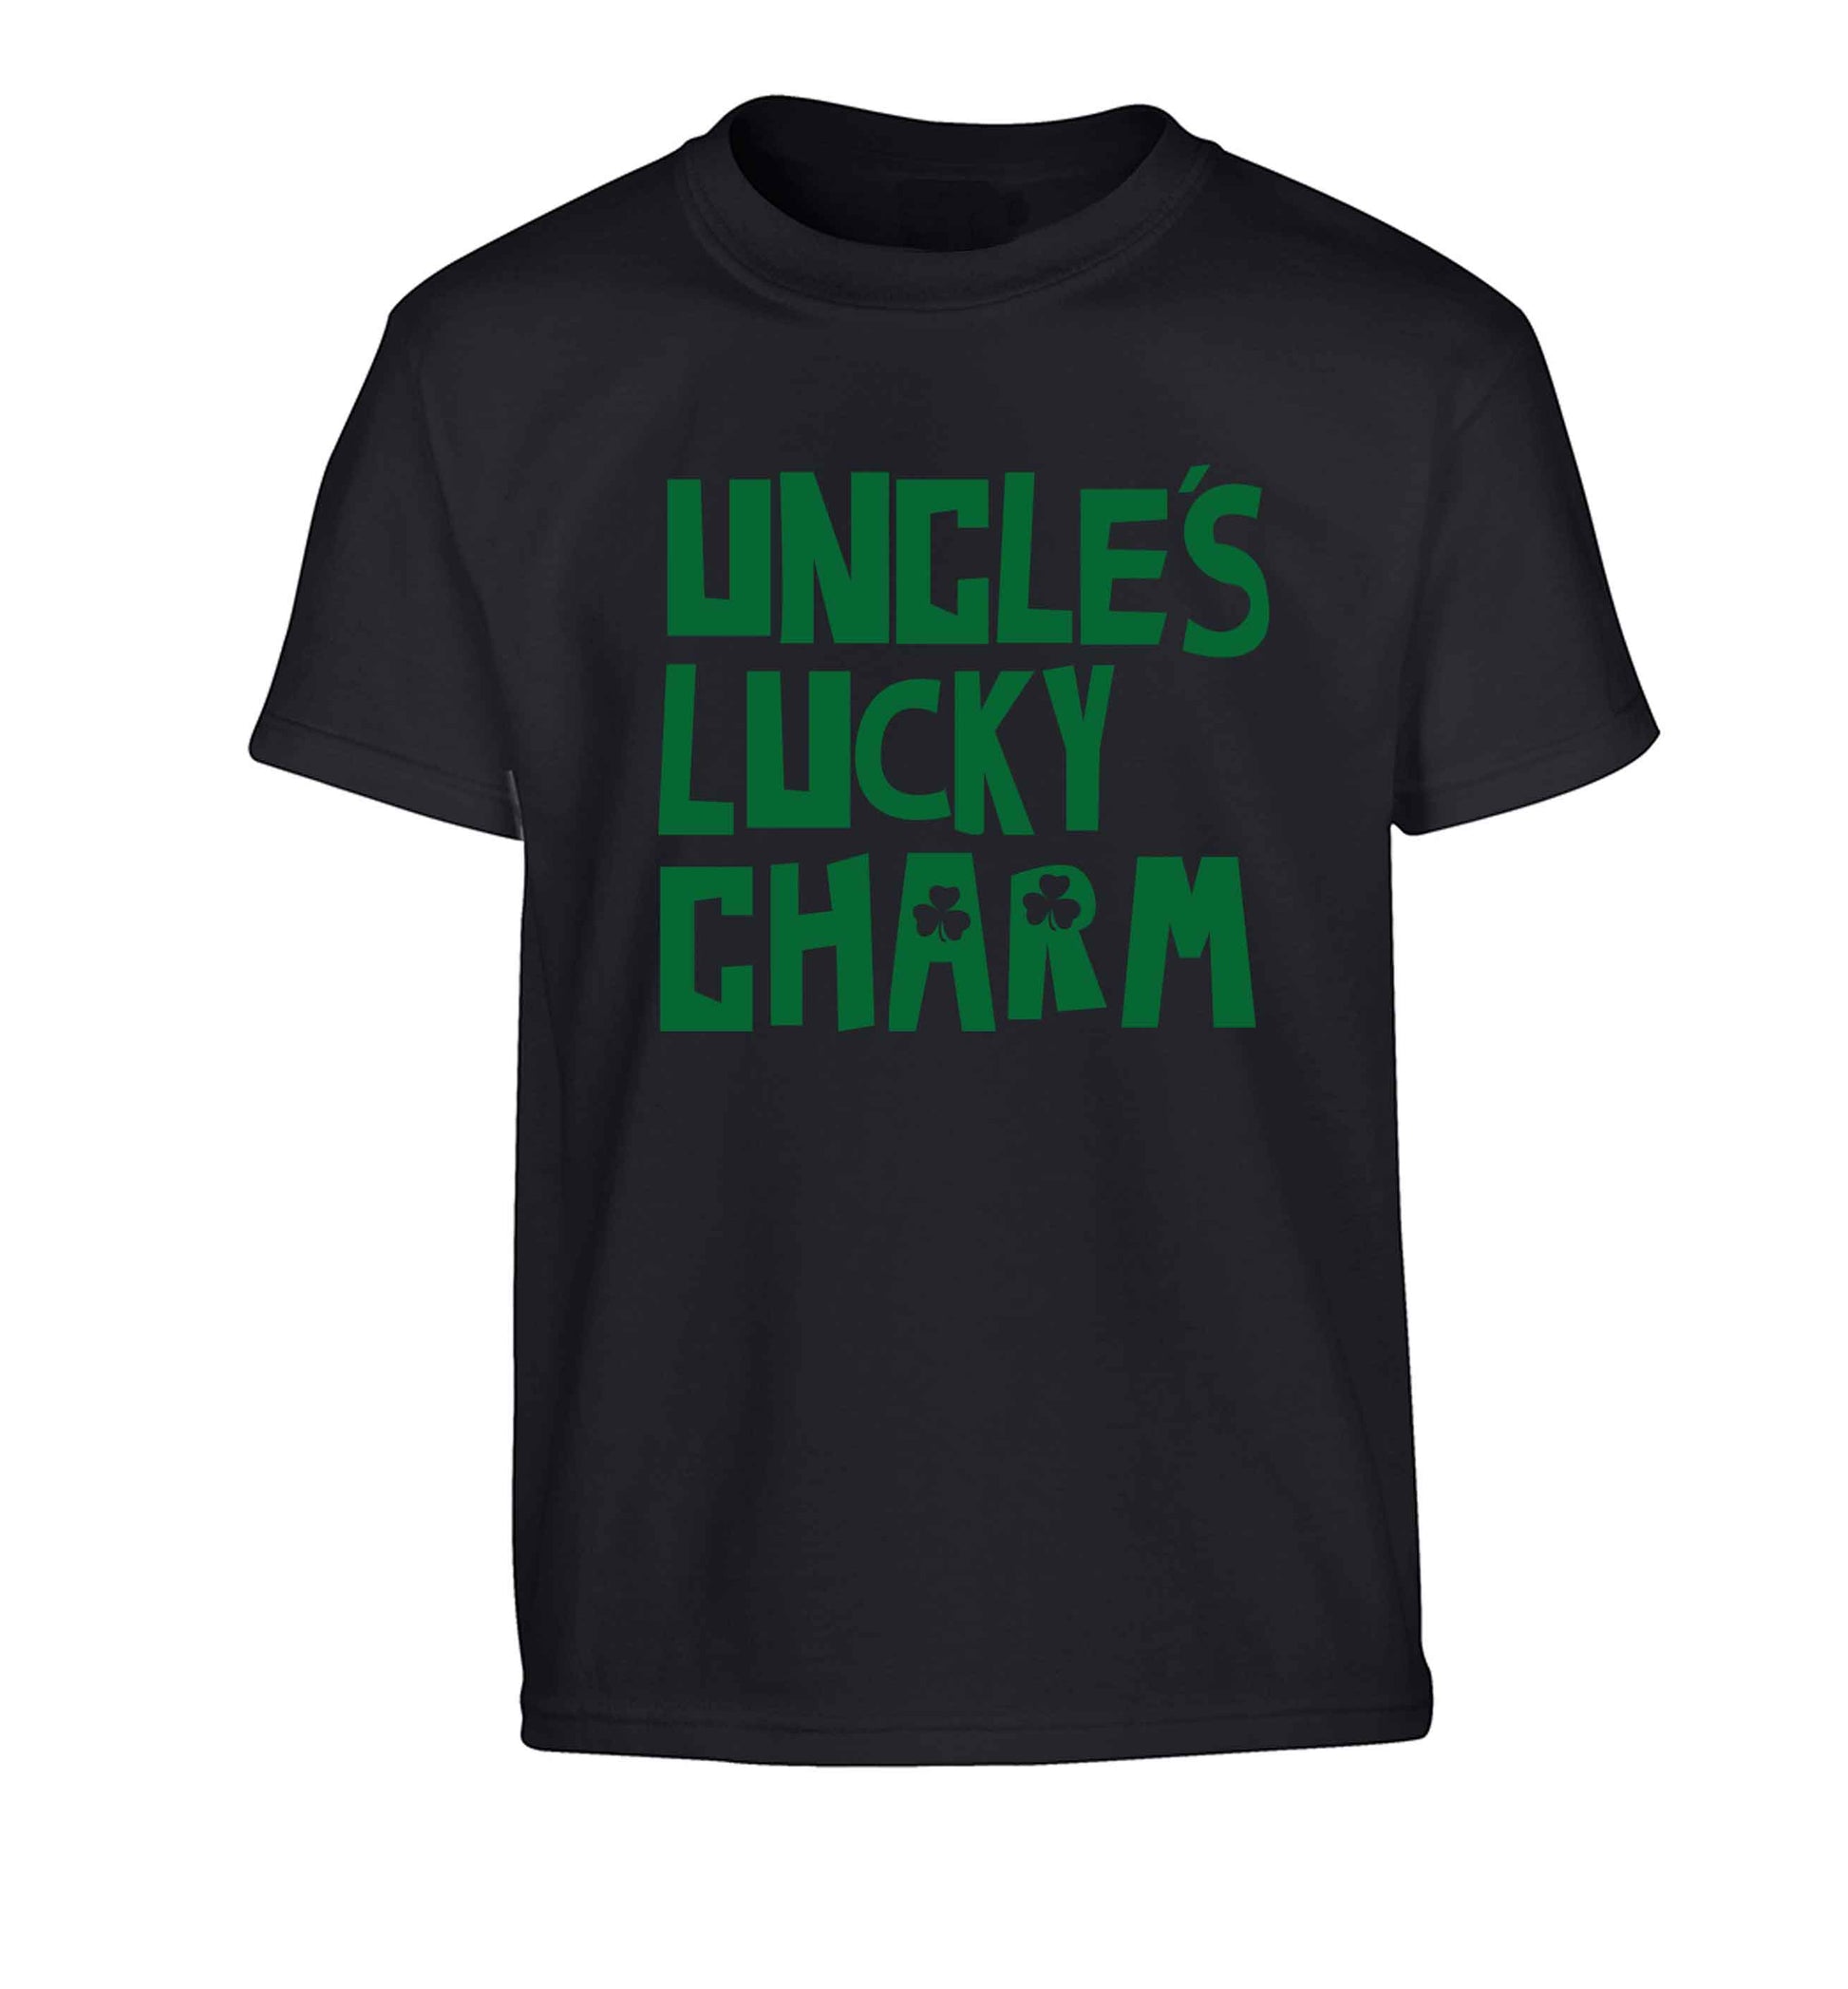 Uncles lucky charm Children's black Tshirt 12-13 Years